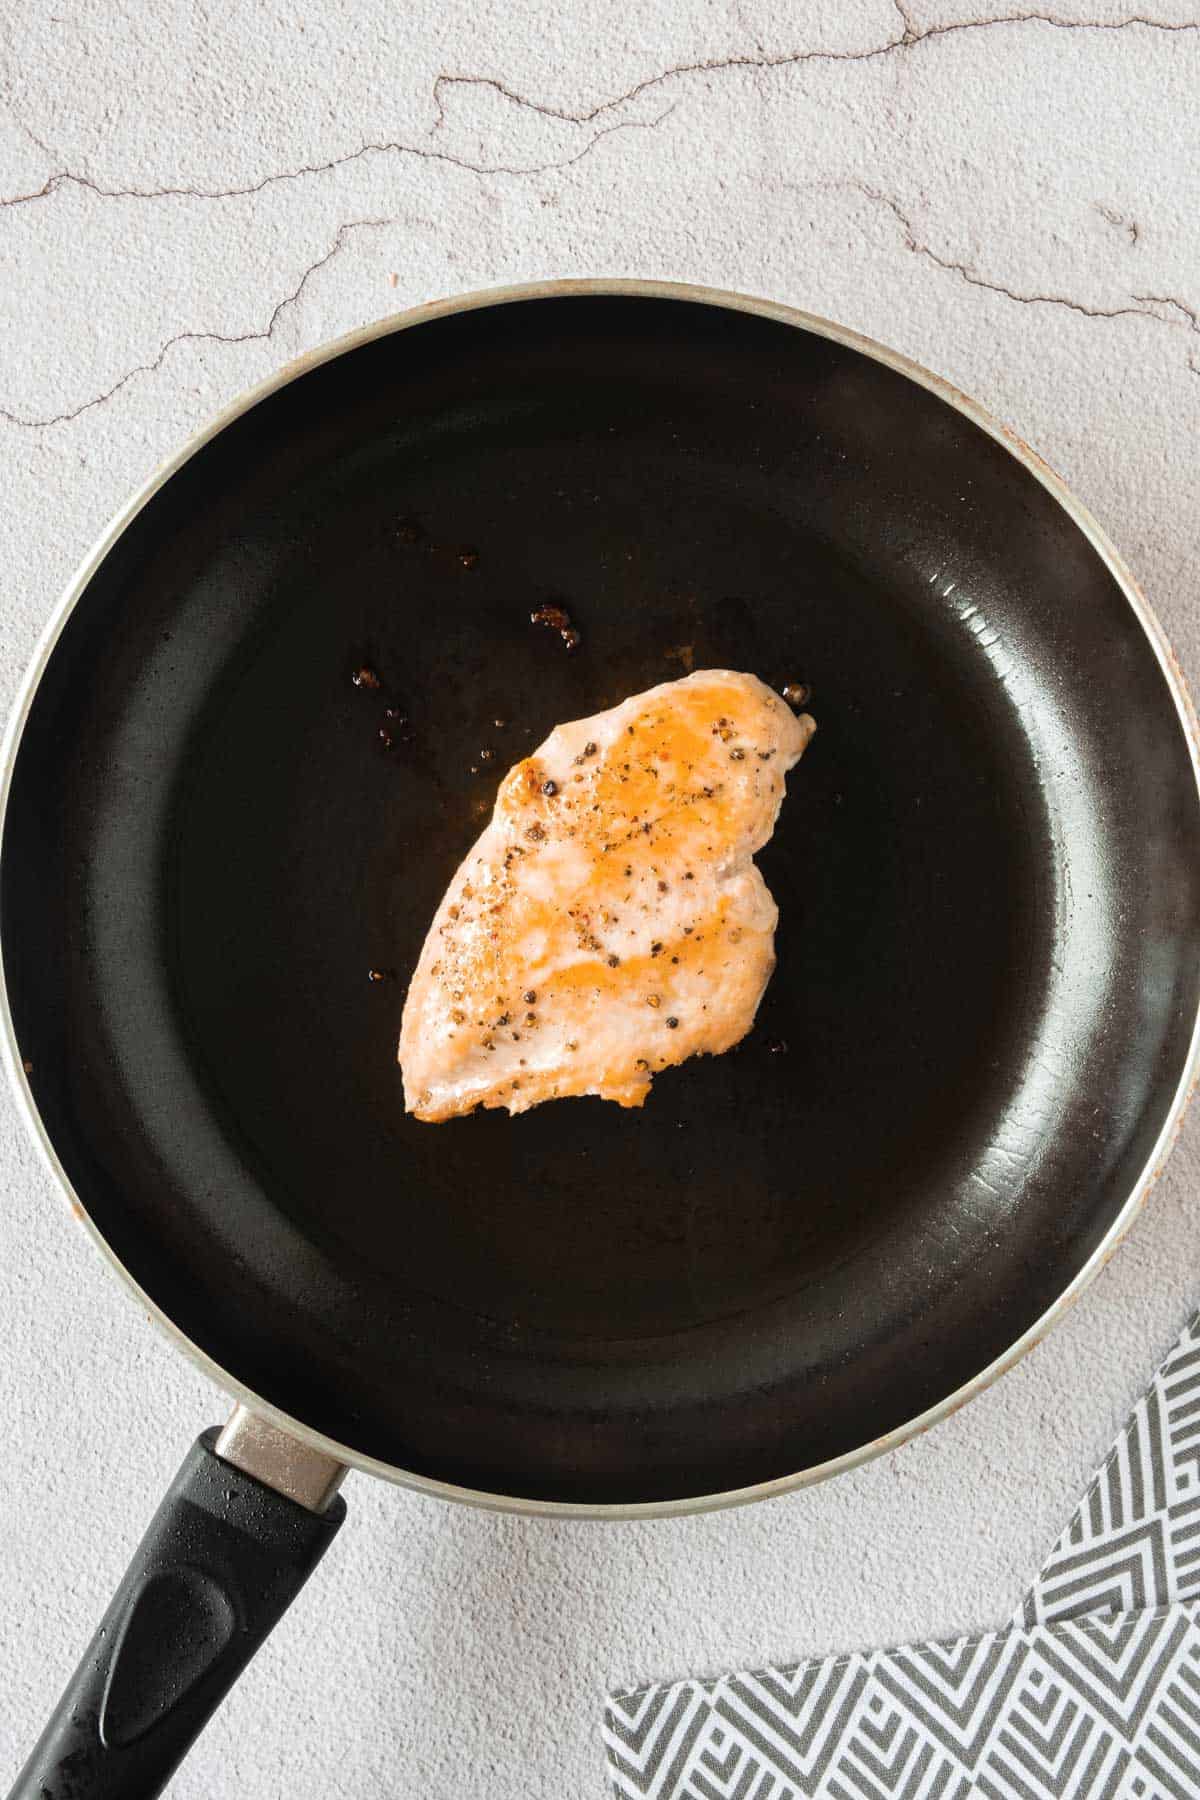 A piece of chicken is being cooked in a frying pan.